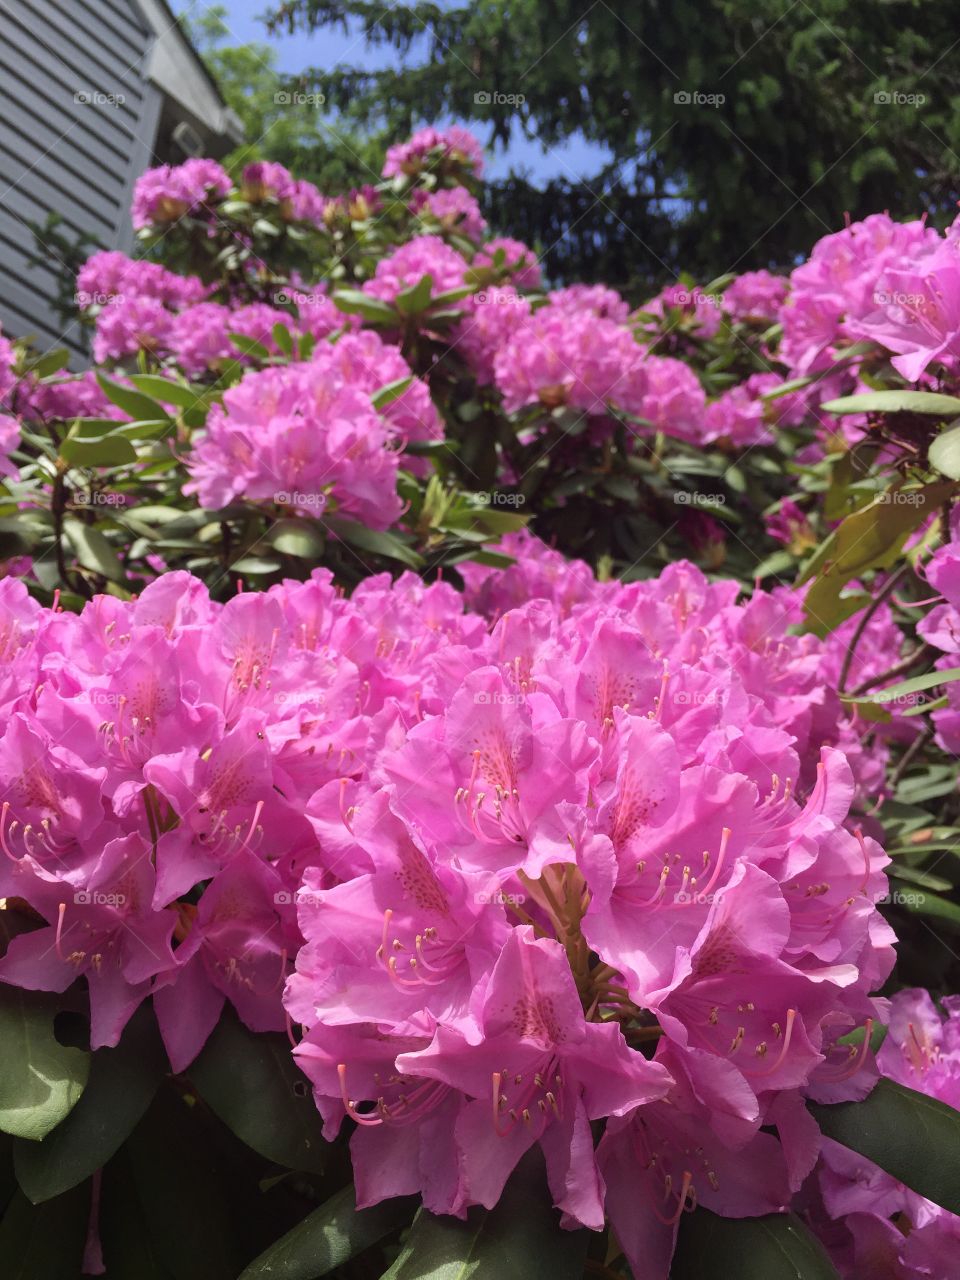 Rhododendron flowers . Rhododendron in full boom in this beautiful spring weather